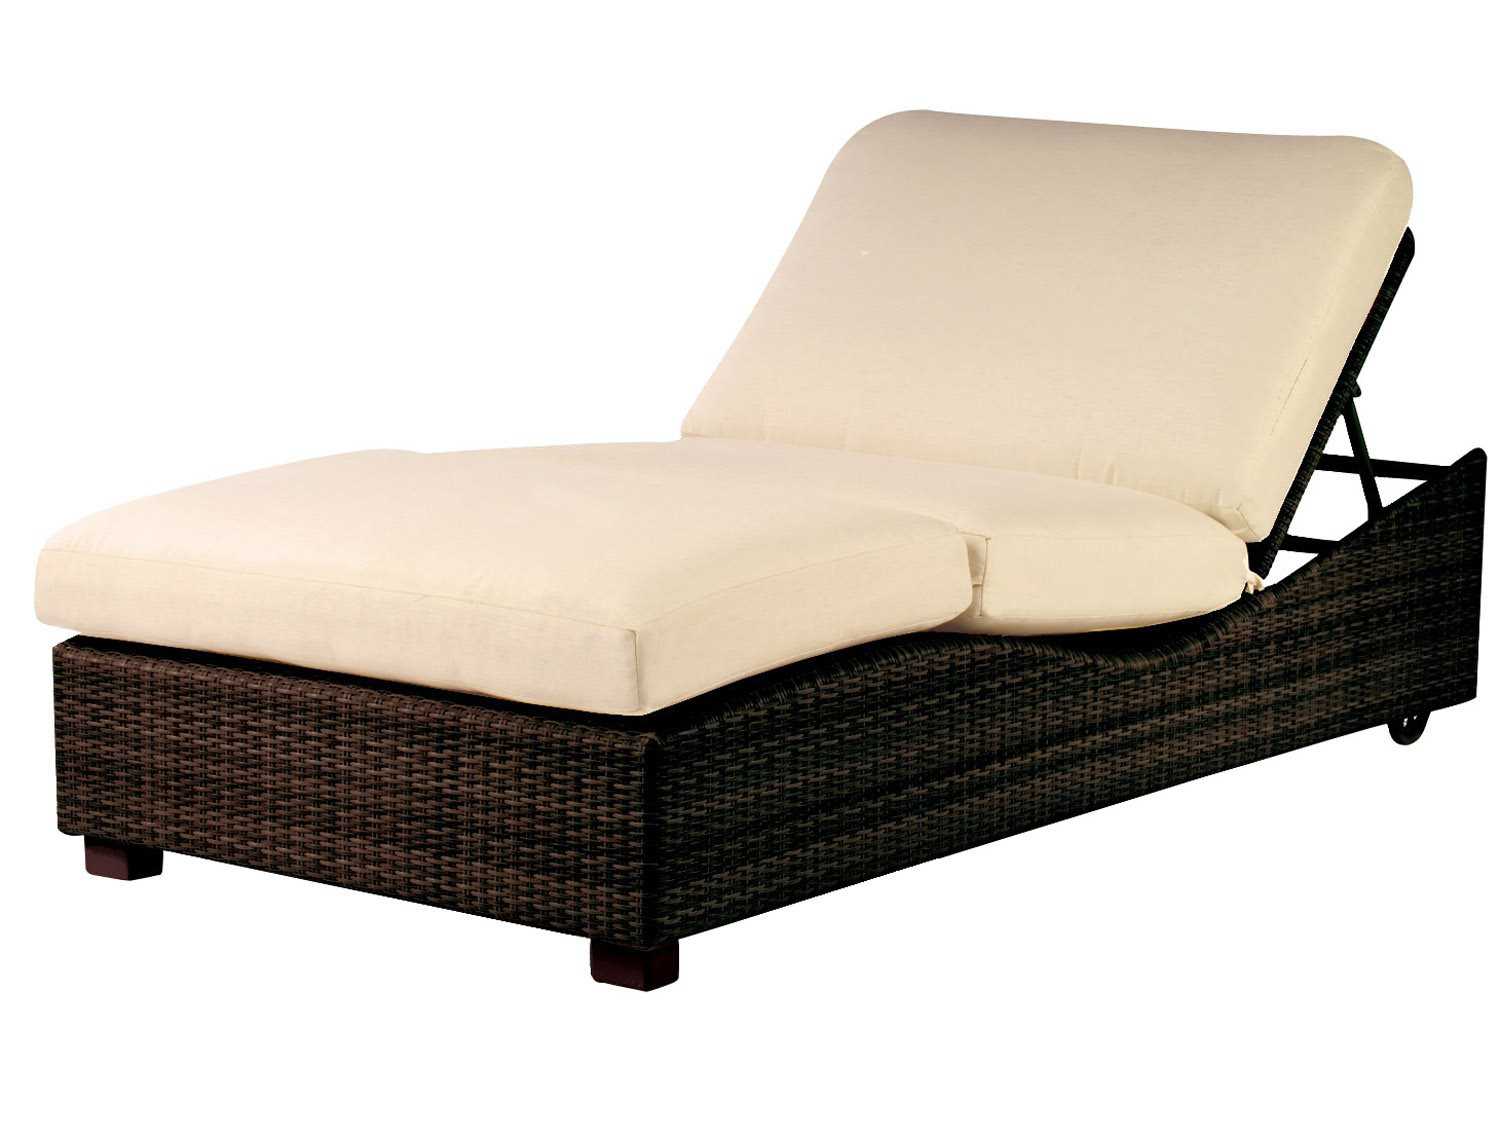 Whitecraft Montecito Double Chaise Lounge Replacement ...